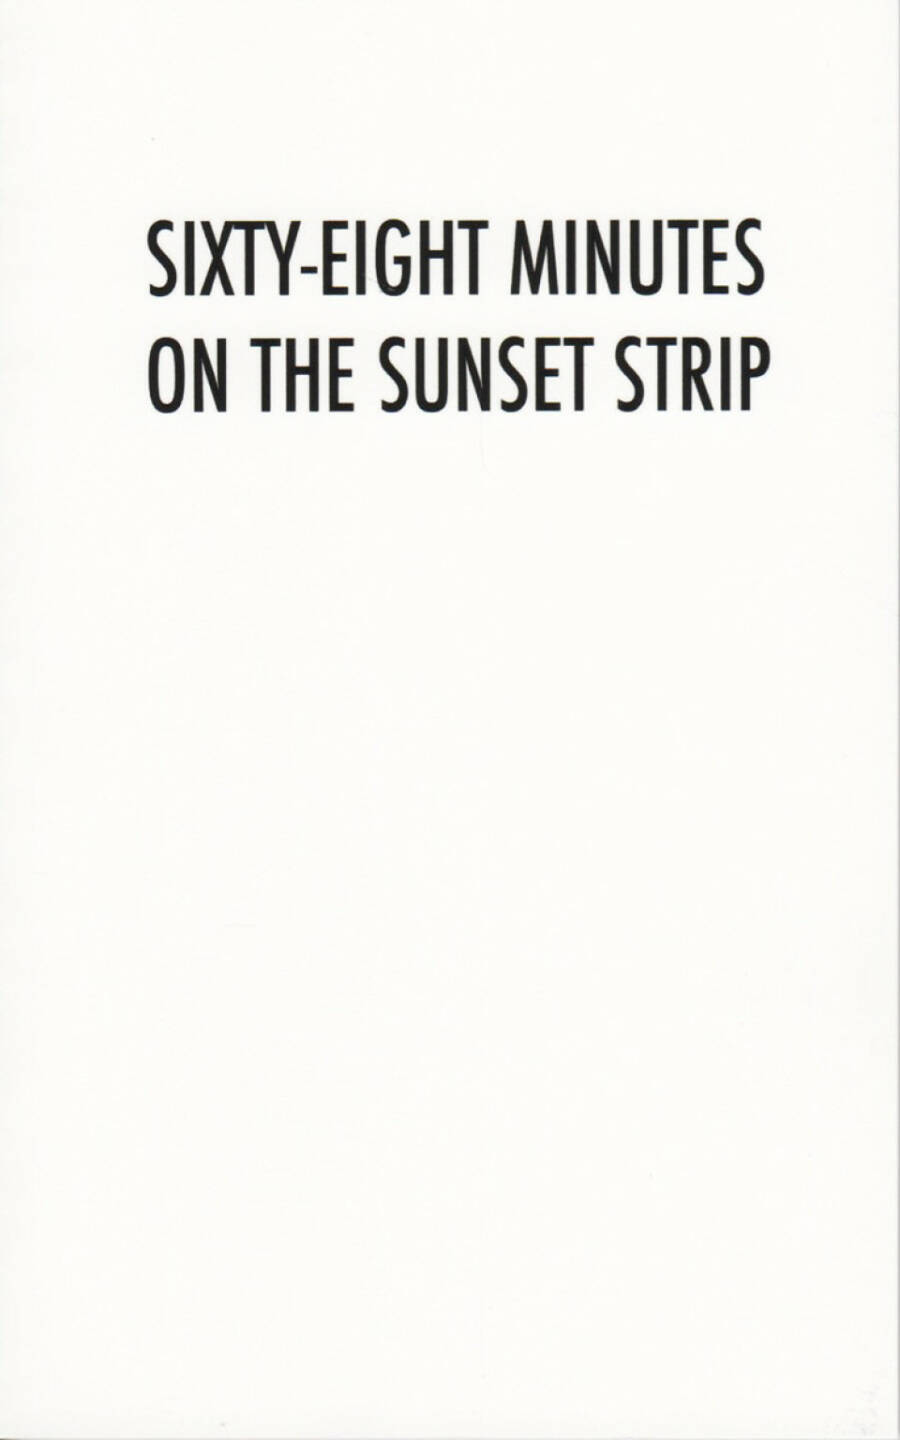 Pascal Anders - Sixty-Eight Minutes on the Sunset Strip, Self Published 2014, Cover - http://josefchladek.com/book/pascal_anders_-_sixty-eight_minutes_on_the_sunset_strip